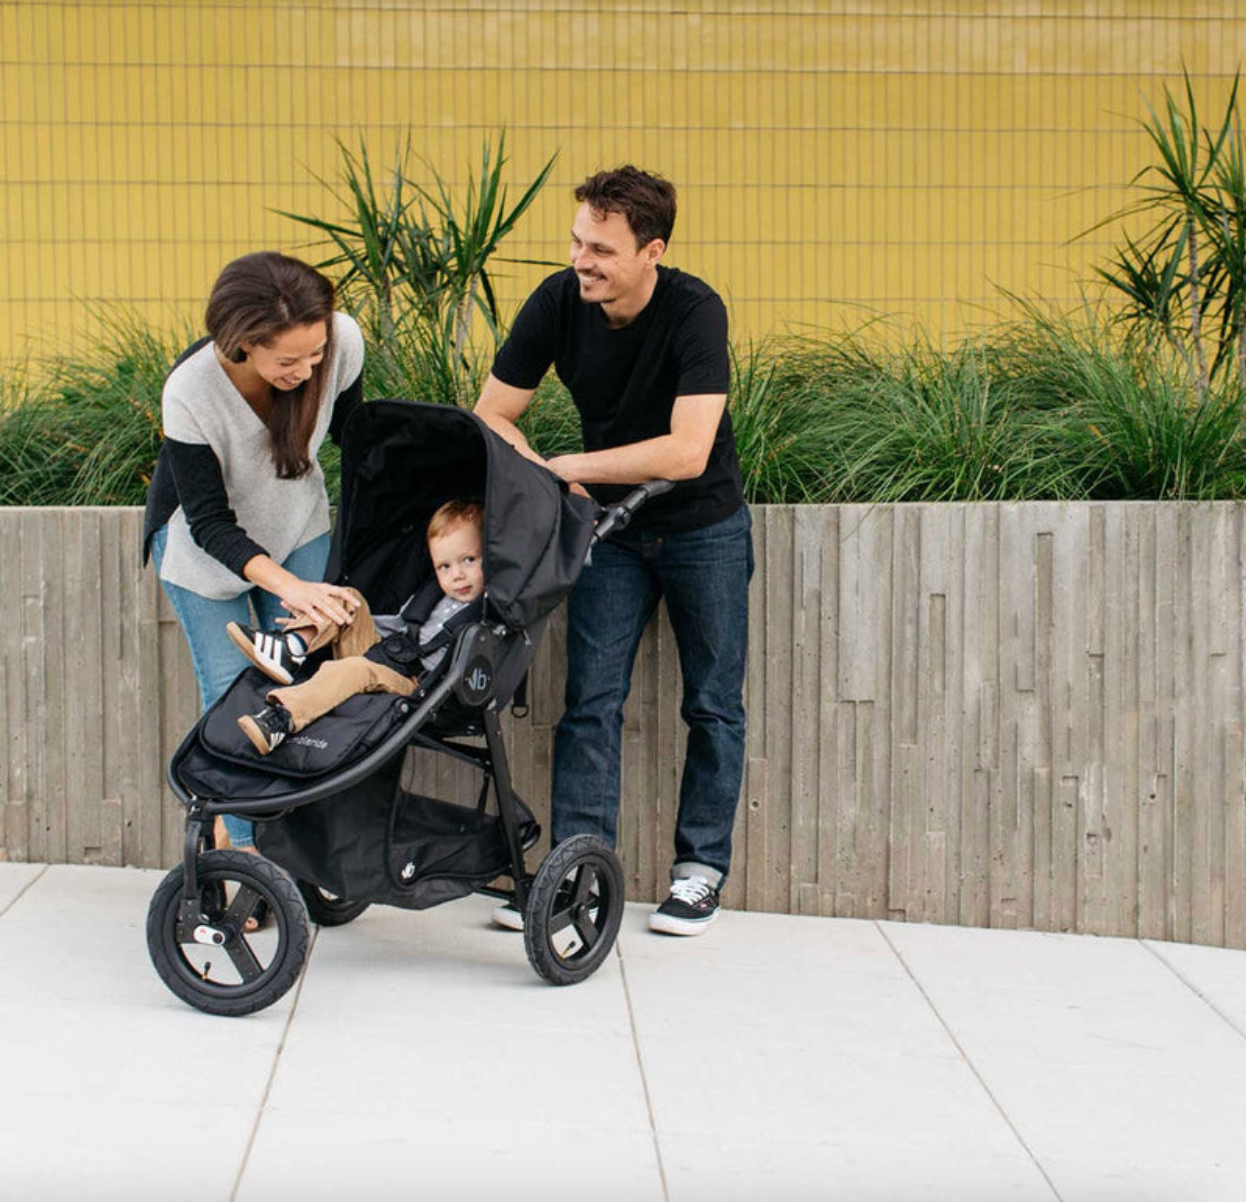 How To Choose The Best Stroller For Your Lifestyle